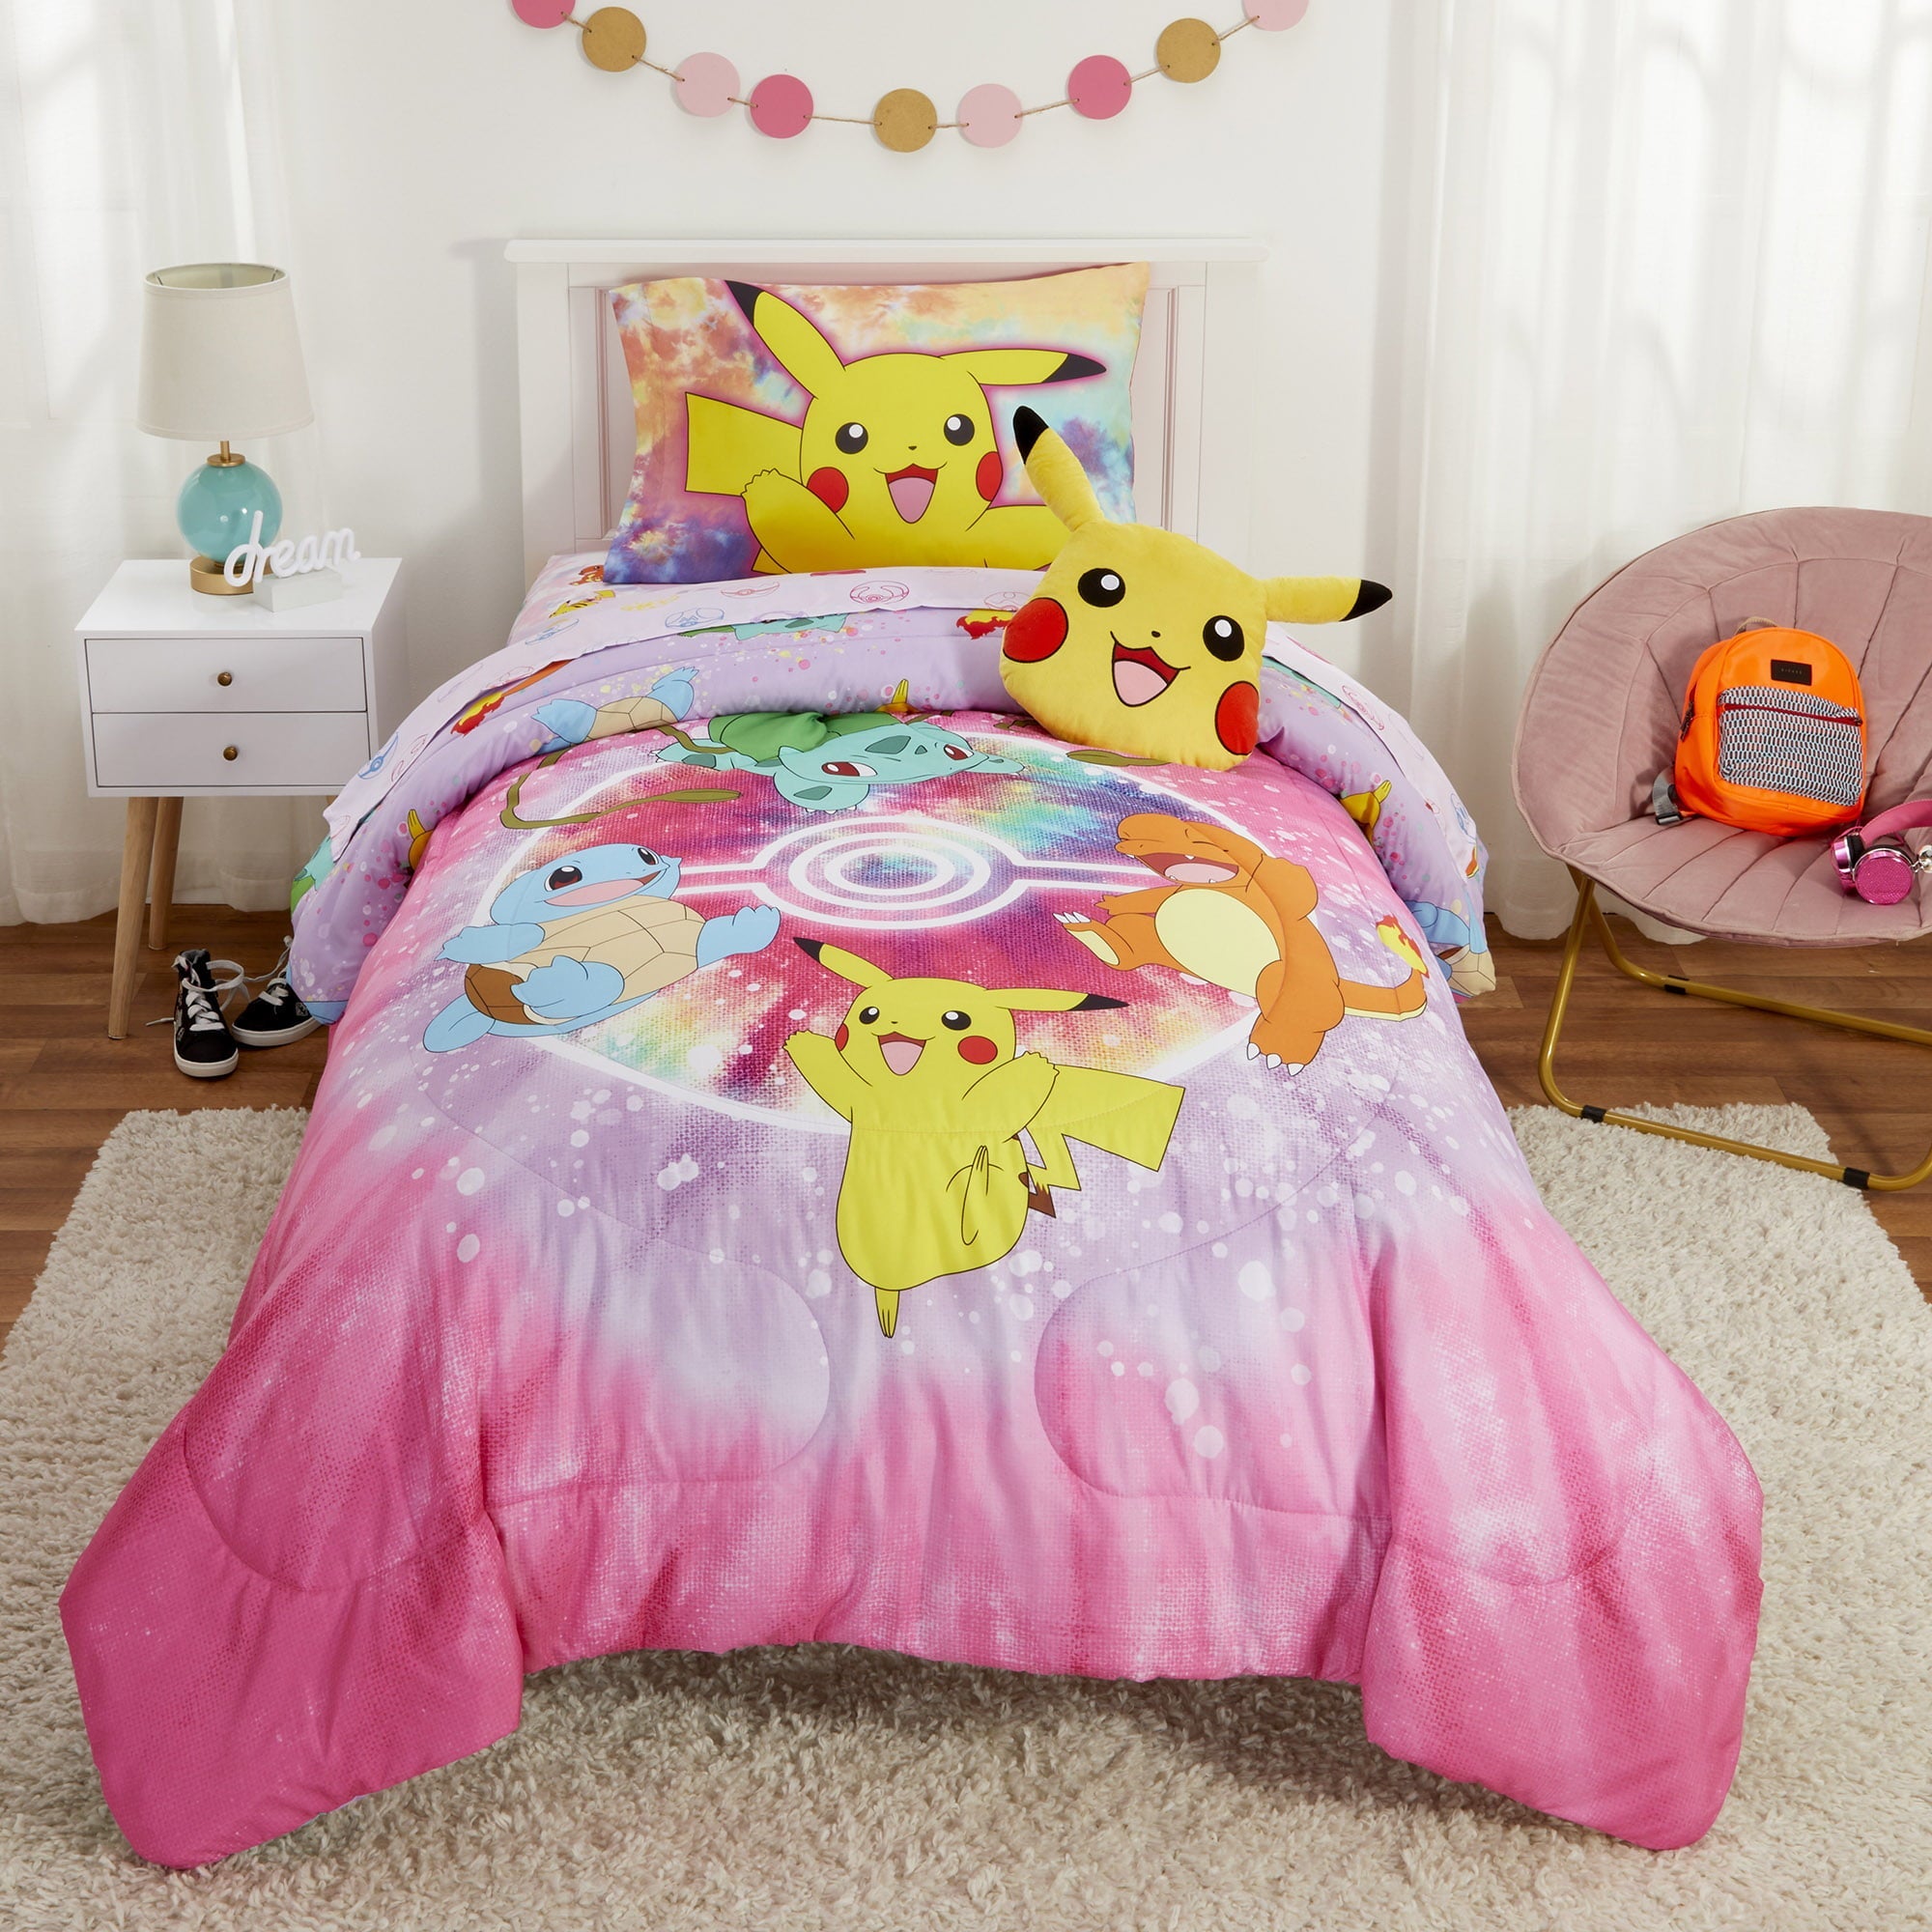 Pokémon Kids Twin Bed in a Bag, Tie-Dye, Gaming Bedding, Comforter and Sheets, Purple